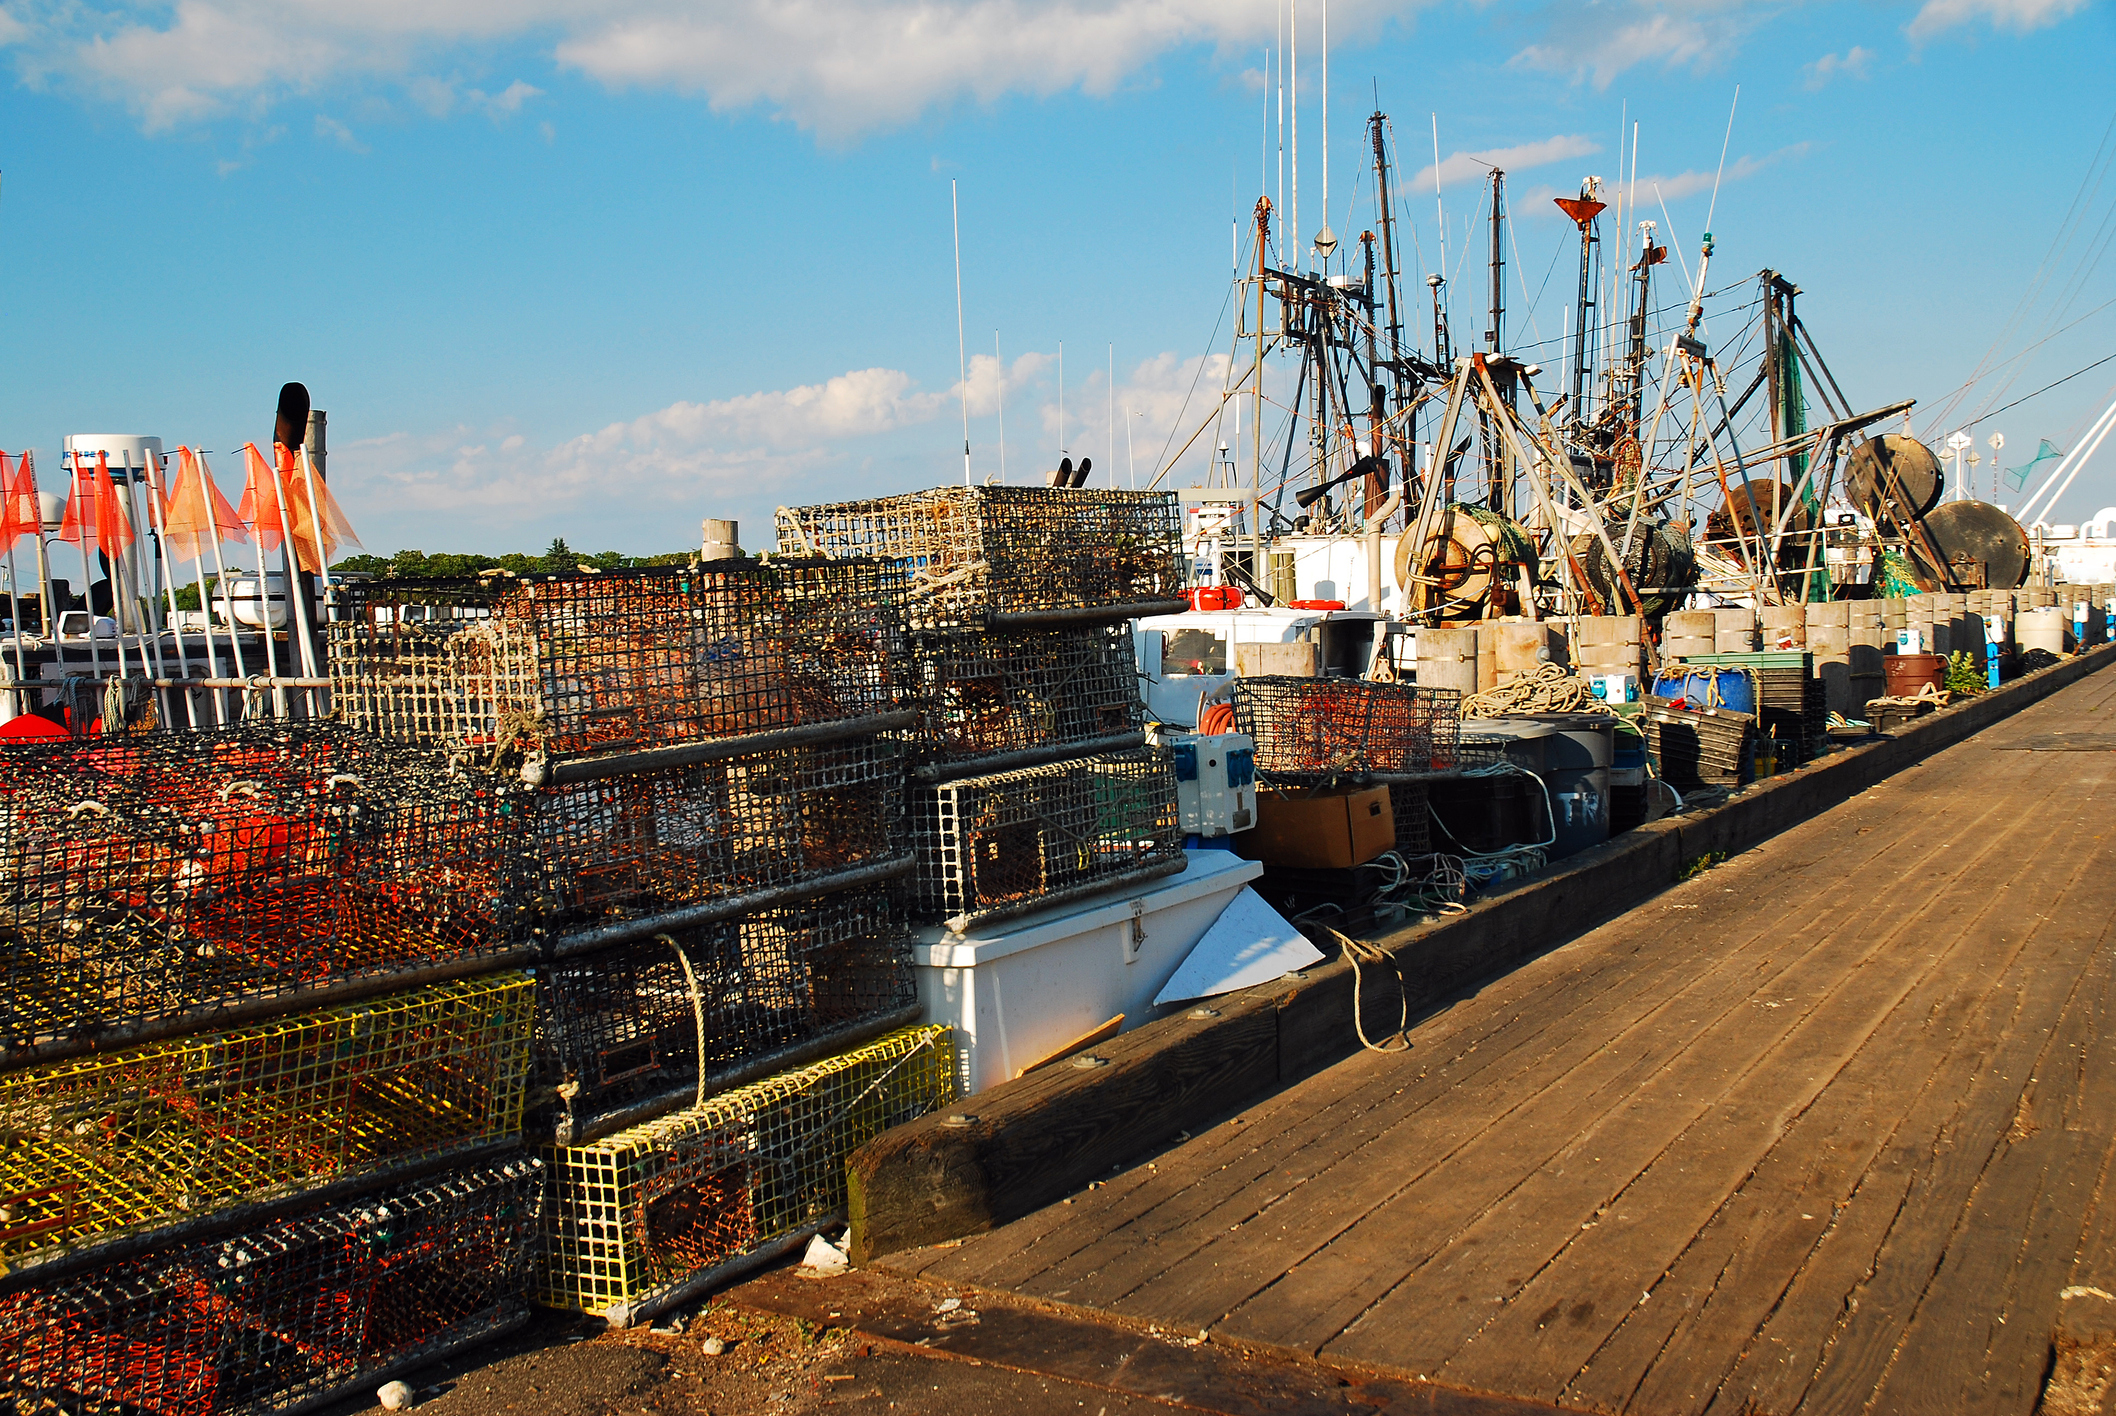 commercial fishing dock of Montauk East End